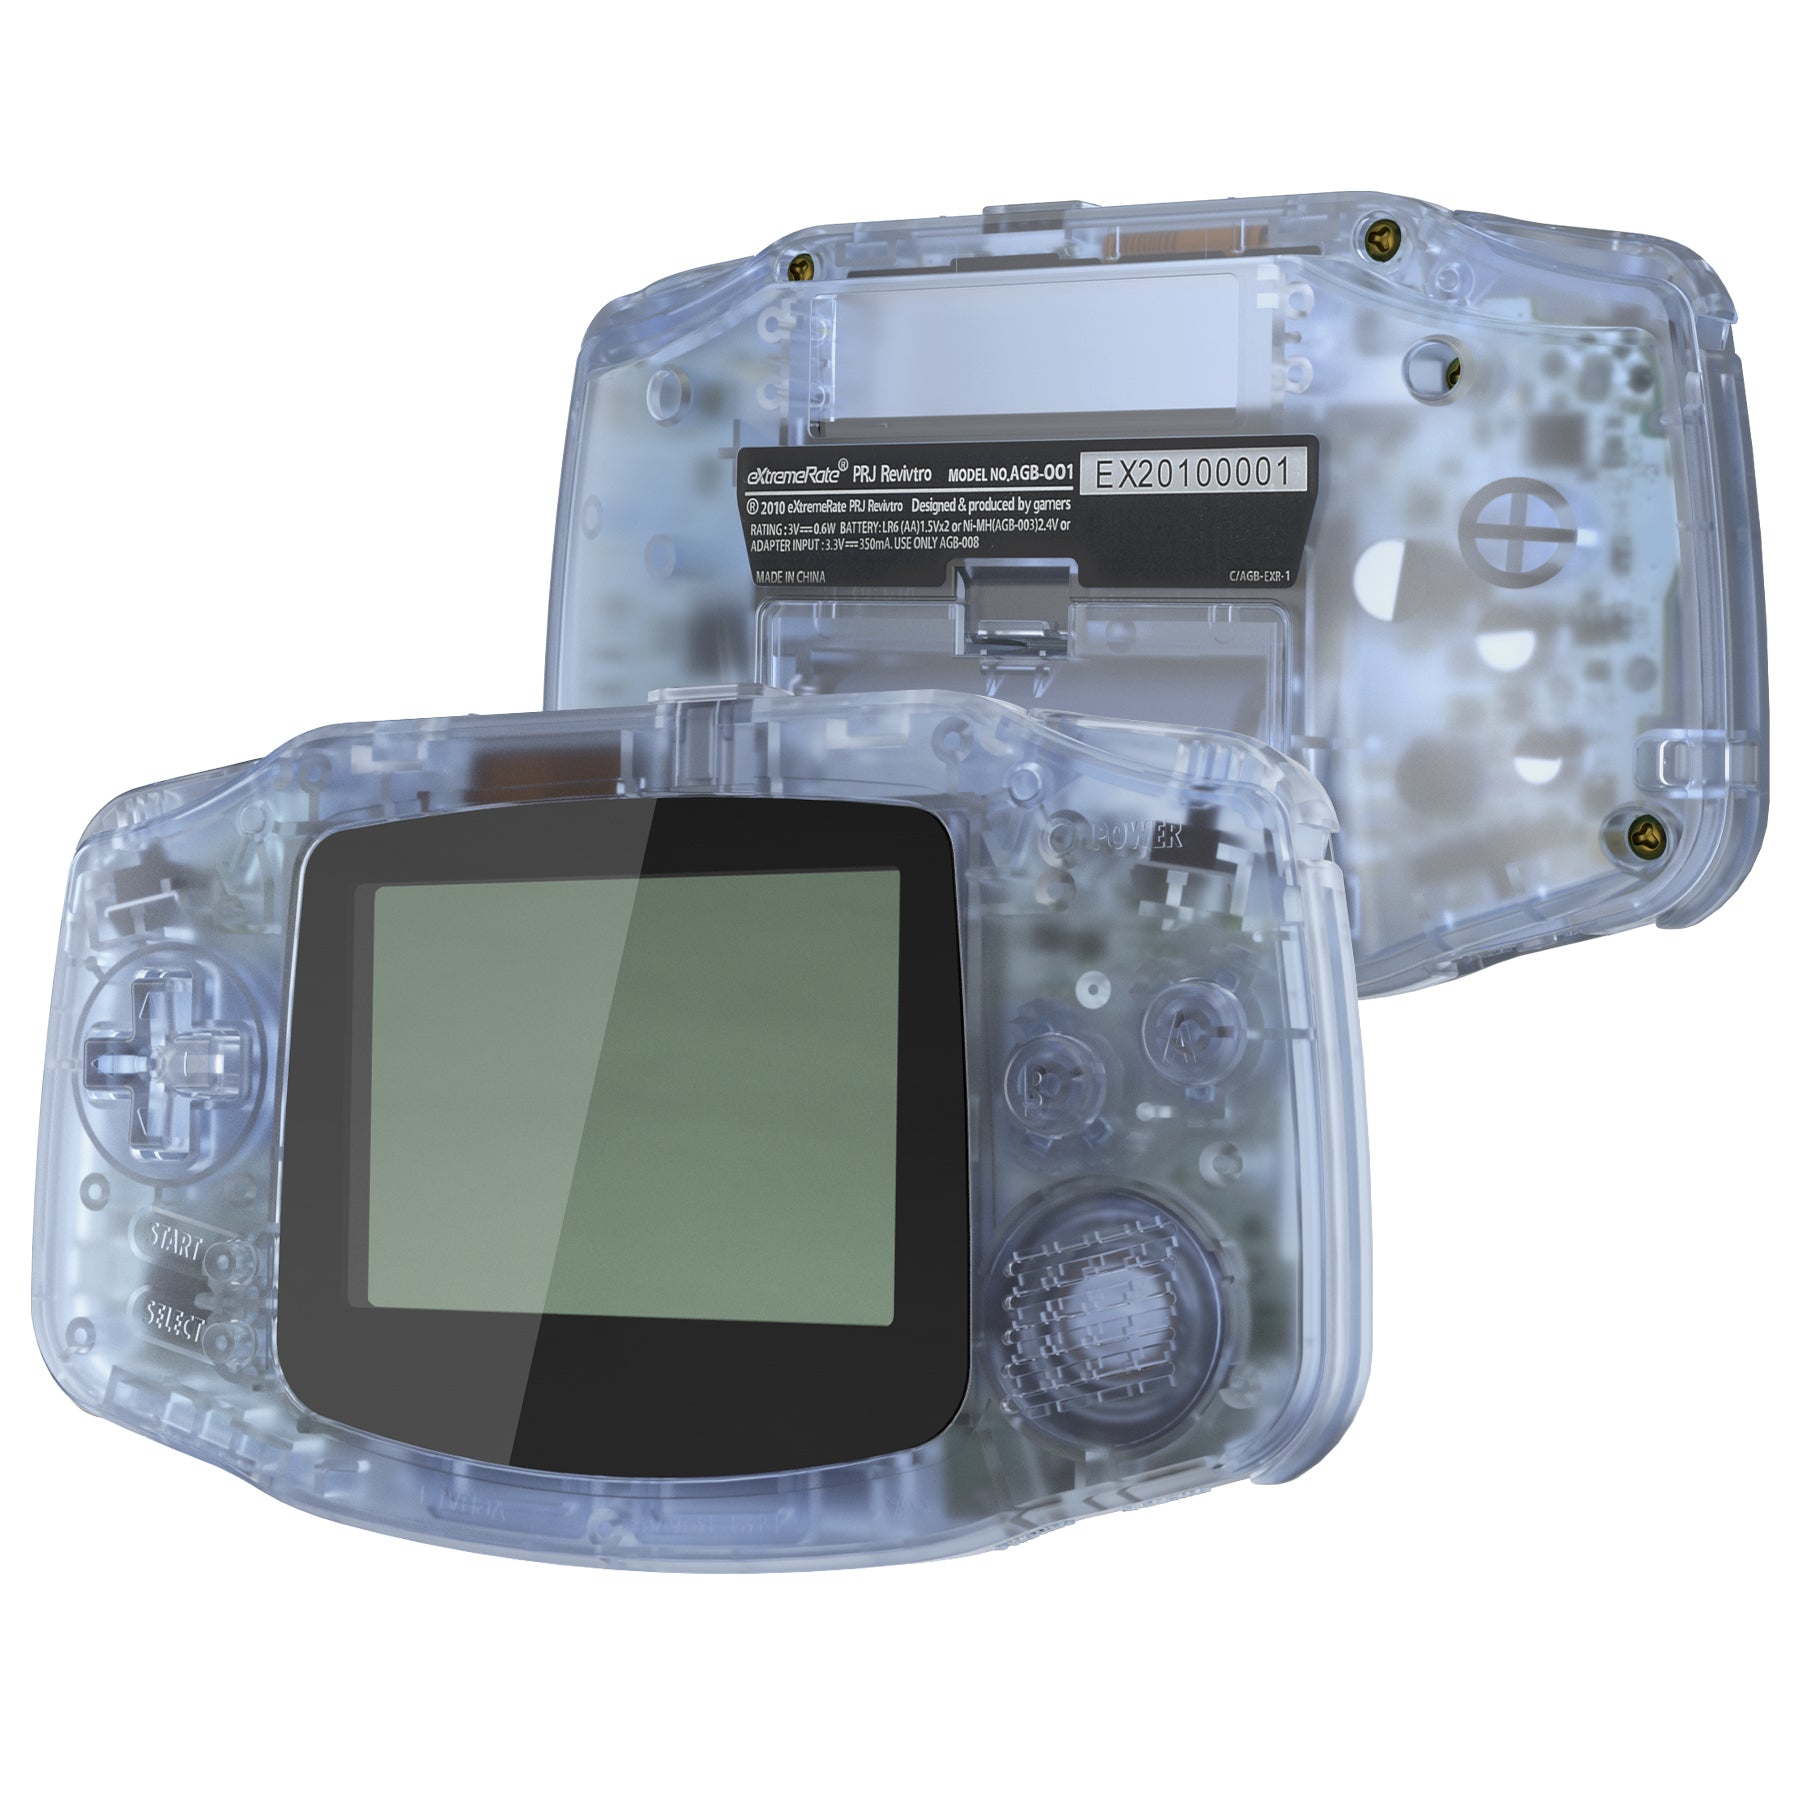 eXtremeRate Retail IPS Ready Upgraded eXtremeRate Glacier Blue Replacement Shell Full Housing Cover & Black Screen Lens for Gameboy Advance – Compatible with Both IPS & Standard LCD – Console & IPS Screen NOT Included - TAGM5006B